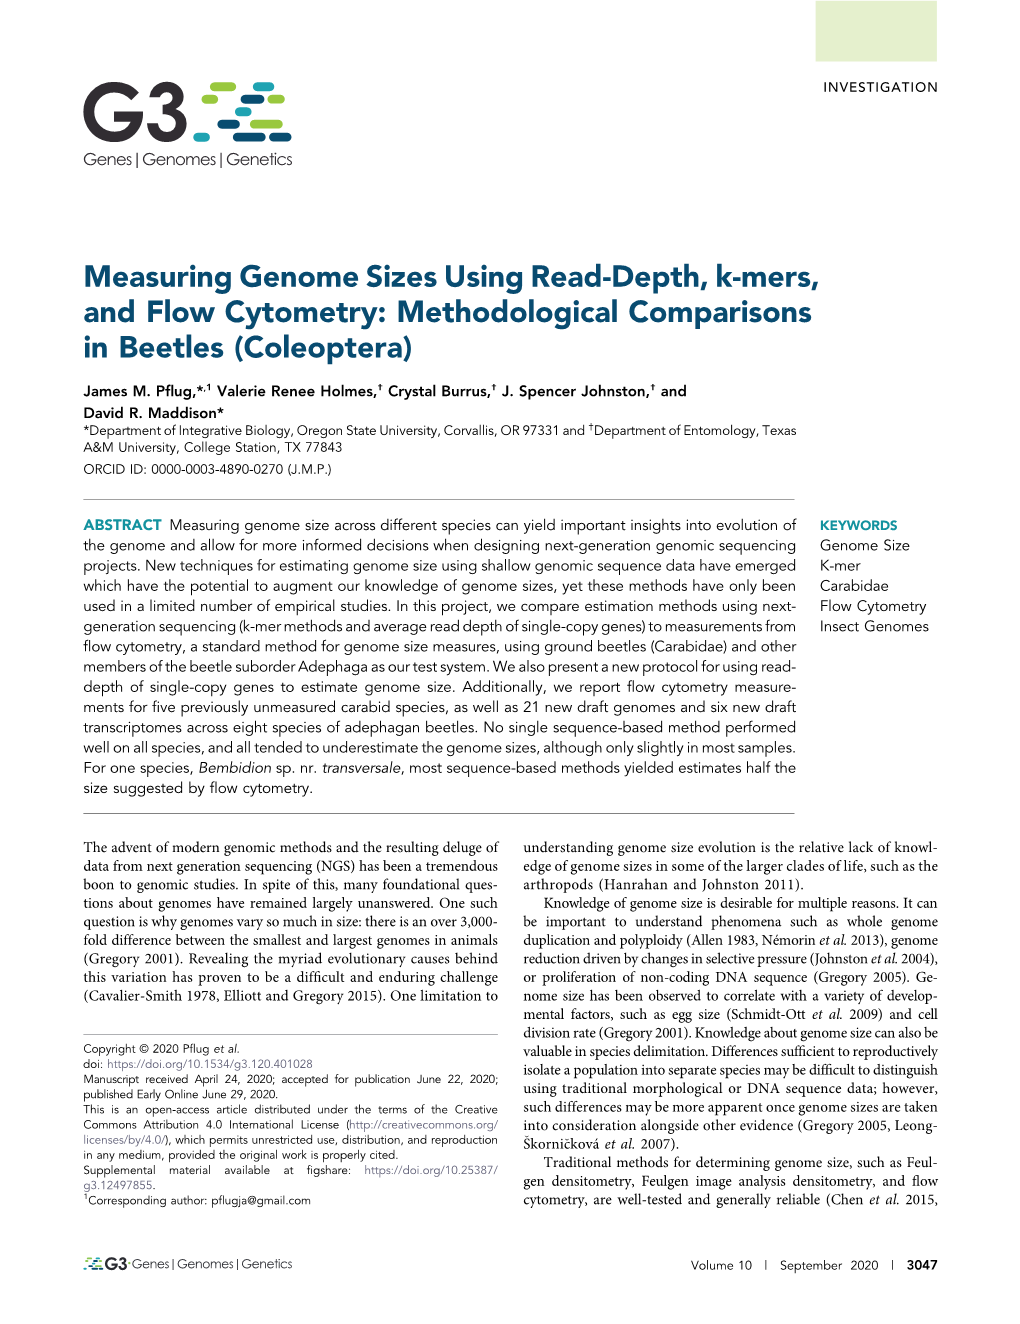 Measuring Genome Sizes Using Read-Depth, K-Mers, and Flow Cytometry: Methodological Comparisons in Beetles (Coleoptera)